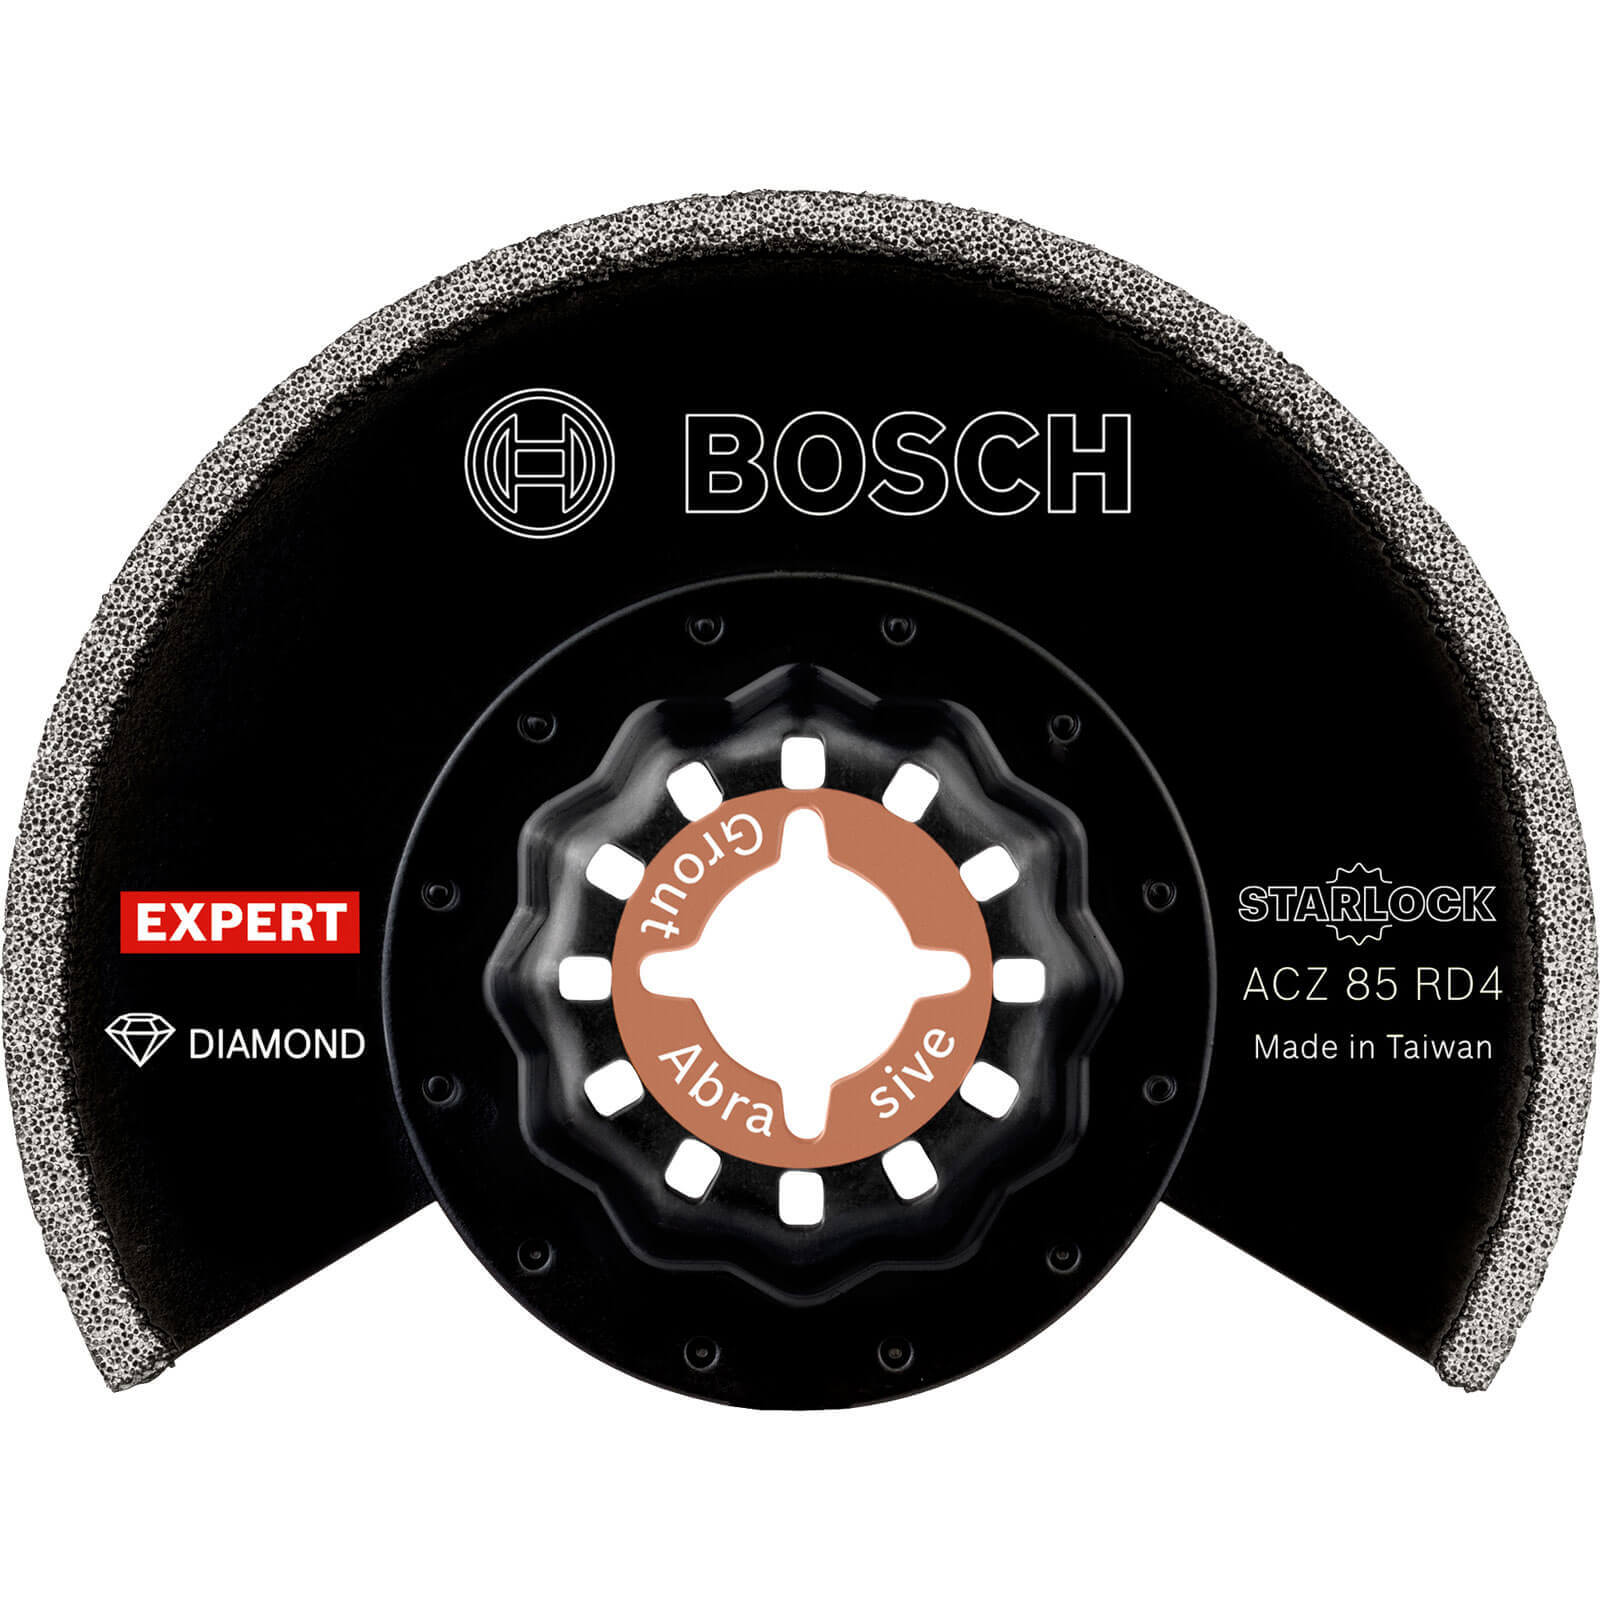 Image of Bosch Expert ACZ 85 RD4 Abrasive and Grout Oscillating Multi Tool Segment Saw Blade 85mm Pack of 10